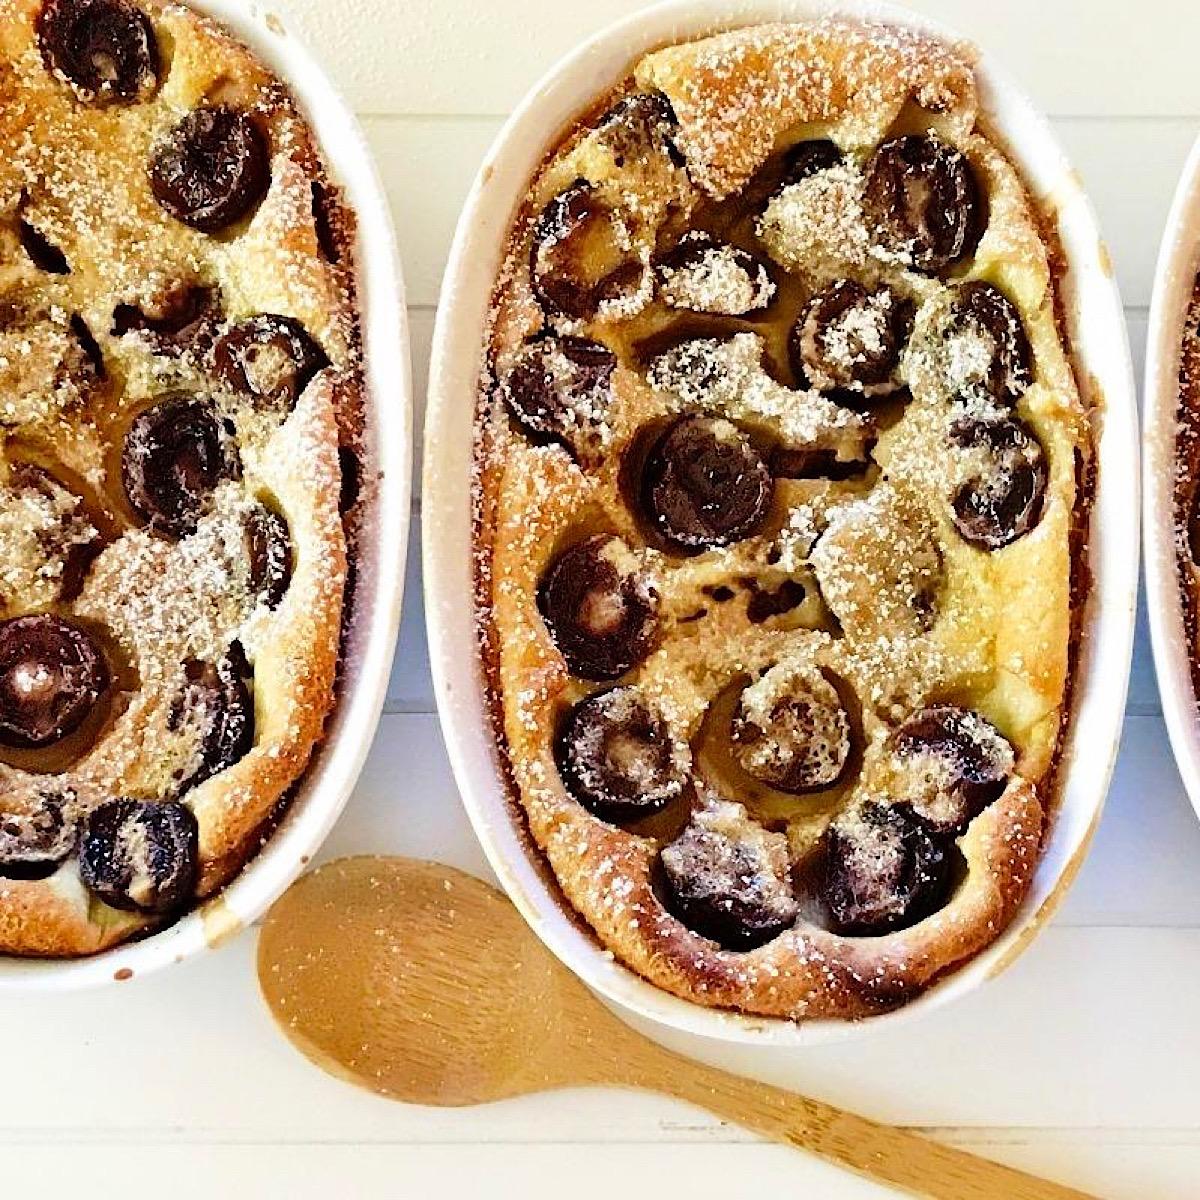 Baking dish of low carb cherry clafoutis dessert